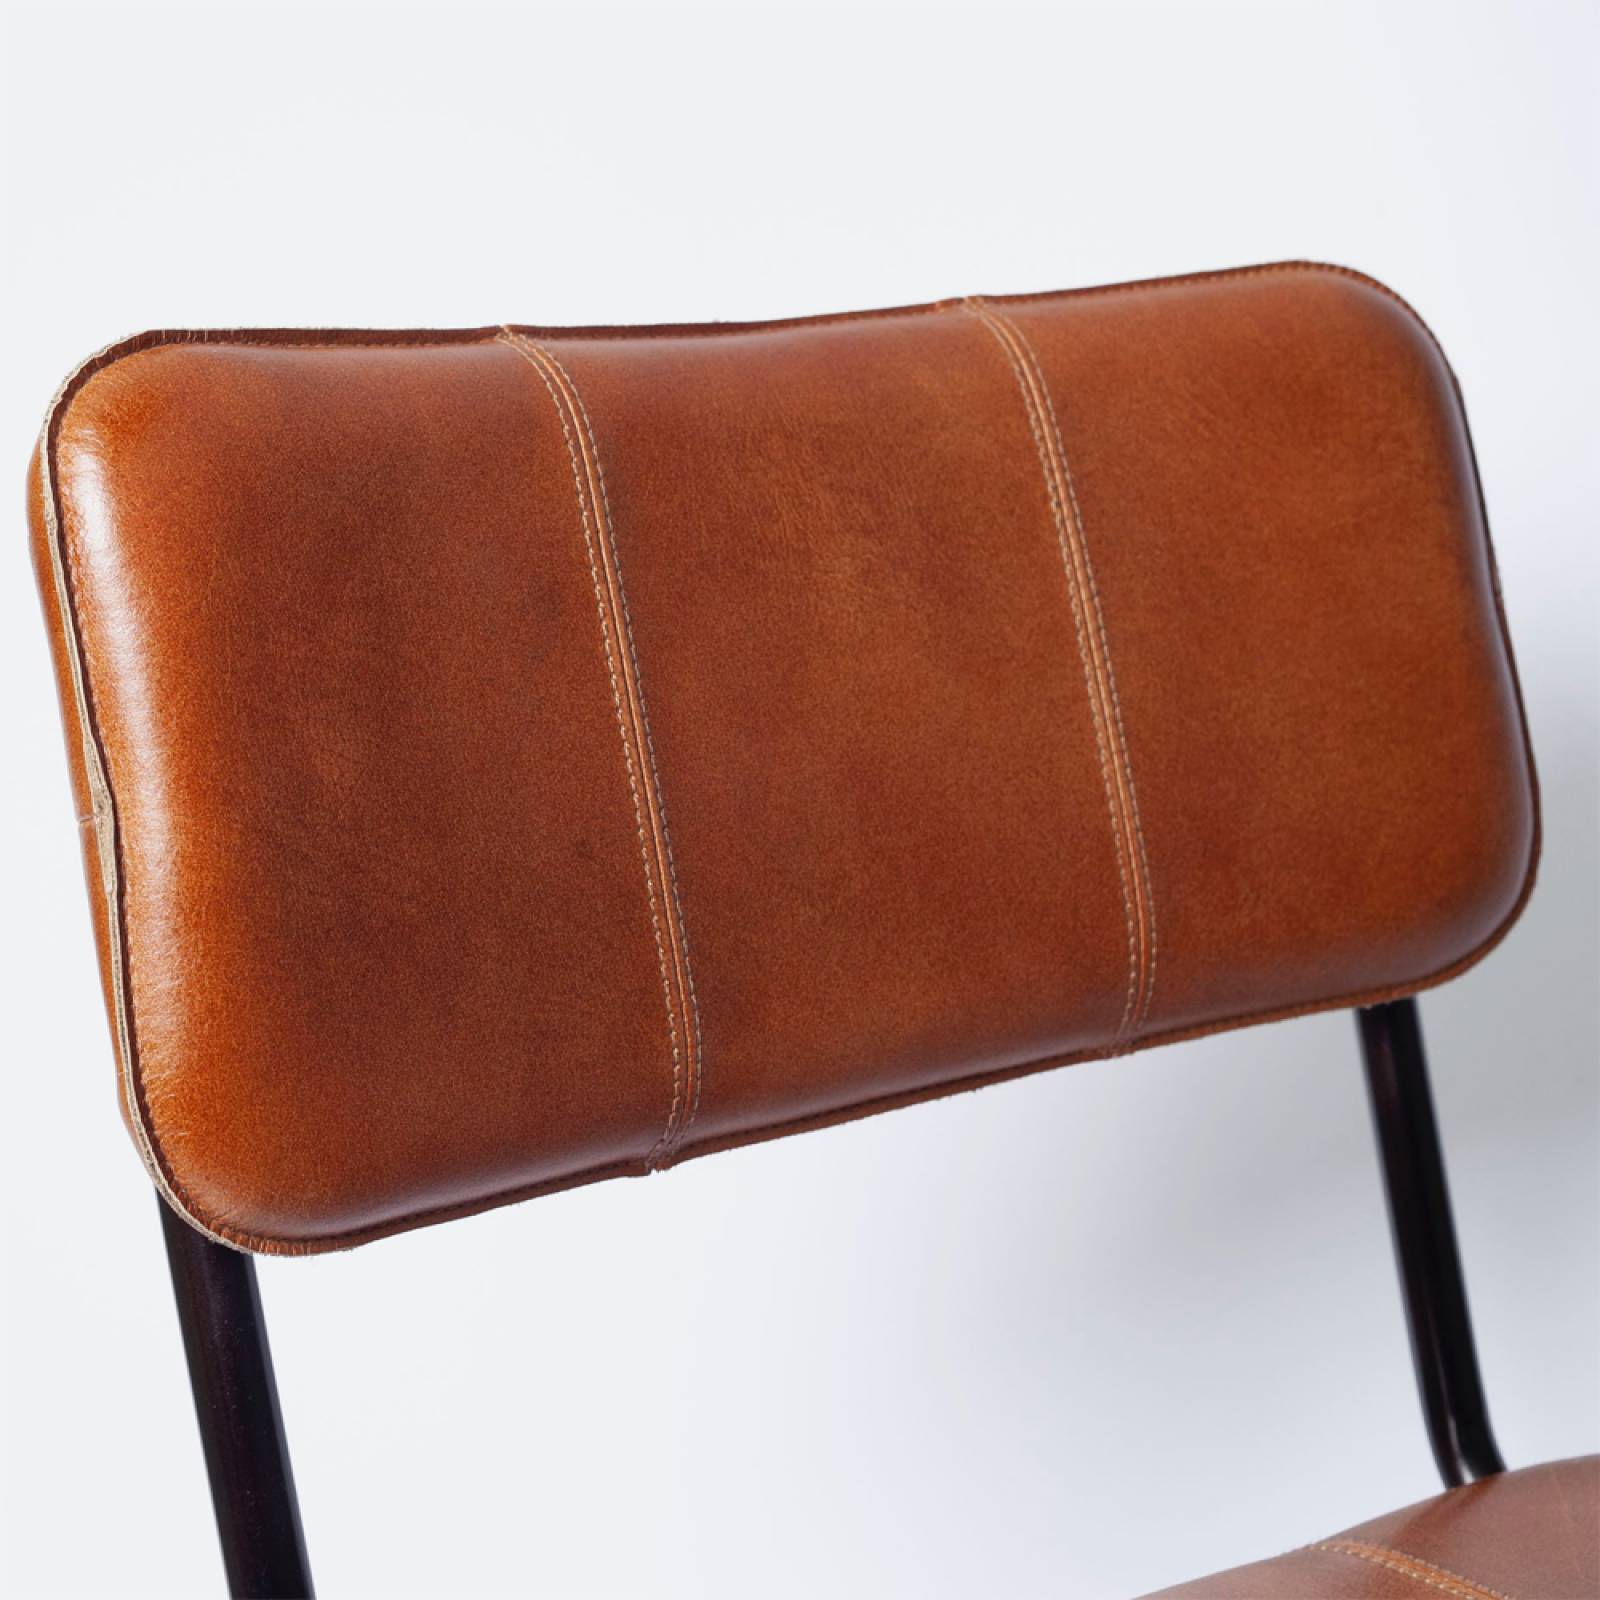 Ukari Dining Chair In Aged Tan Leather thumbnails